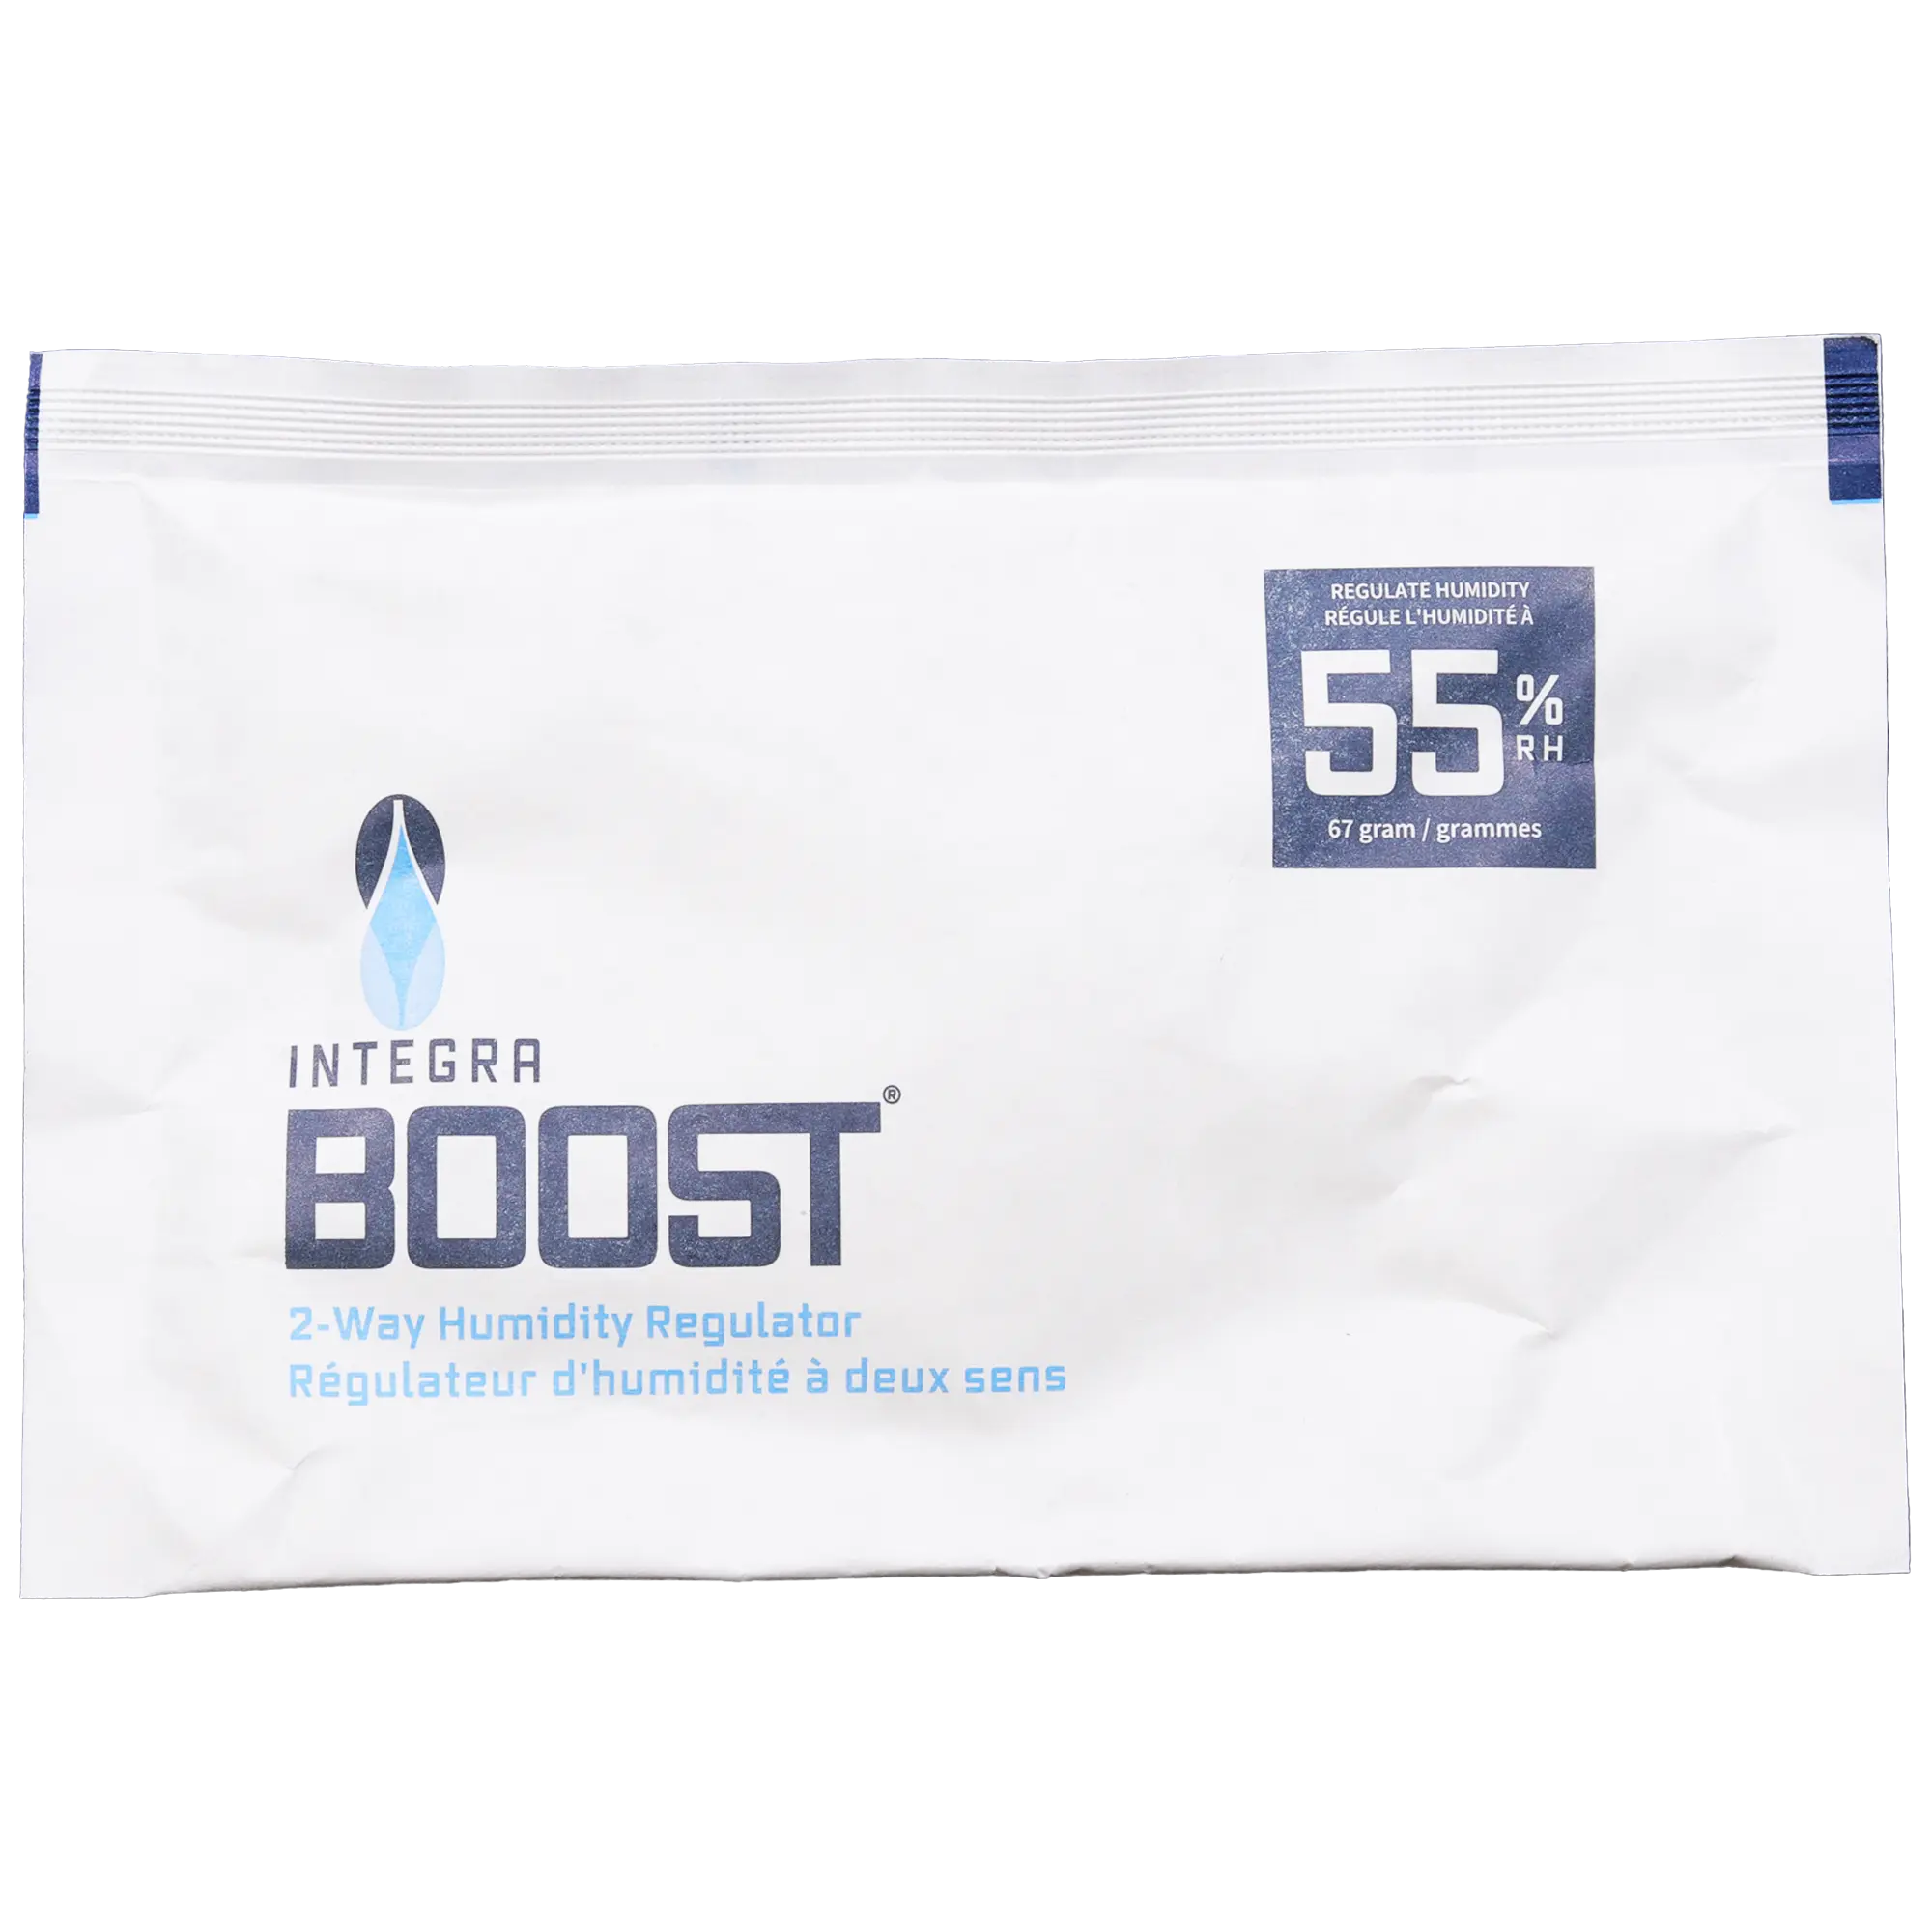 Integra Boost 67g Befeuchterpack 55% R.H.

